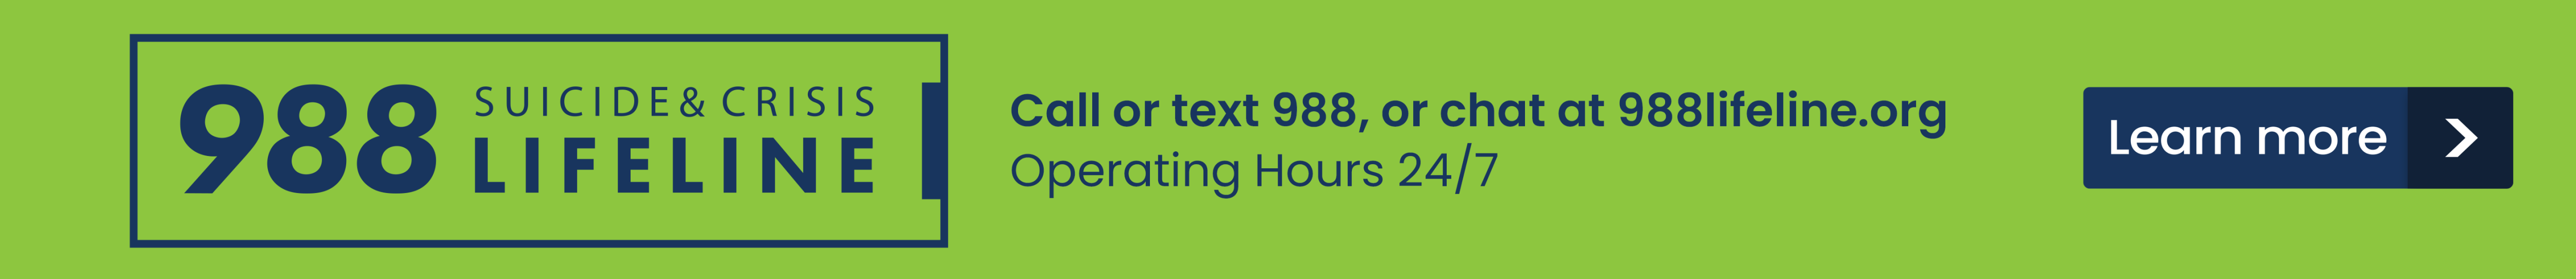 988 Suicide and Crisis Lifeline. Call or text 988 or chat at 988lifeline.org